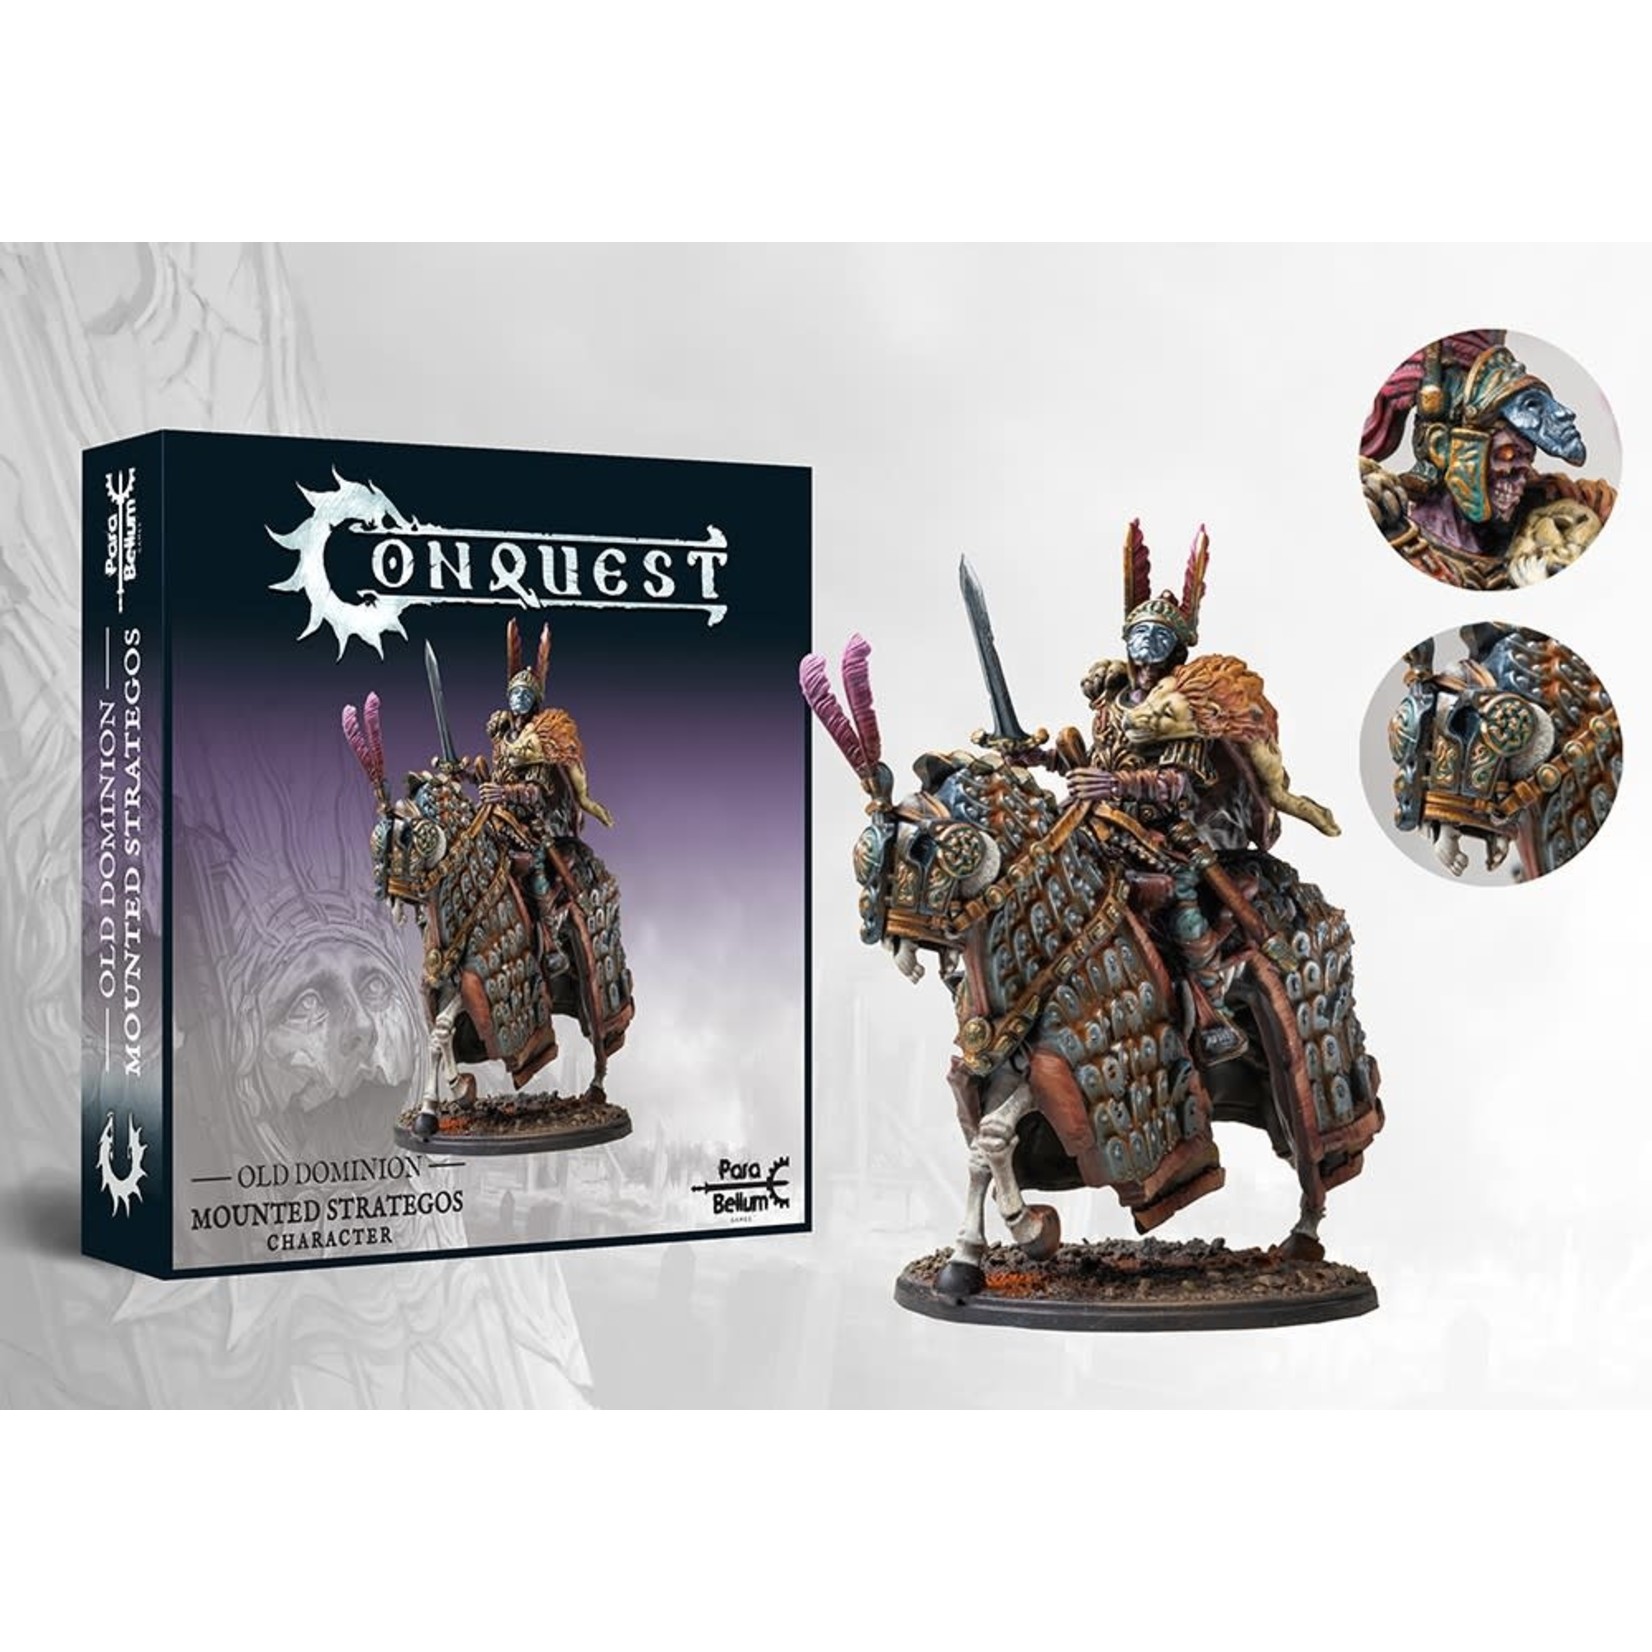 Conquest Mounted Strategos